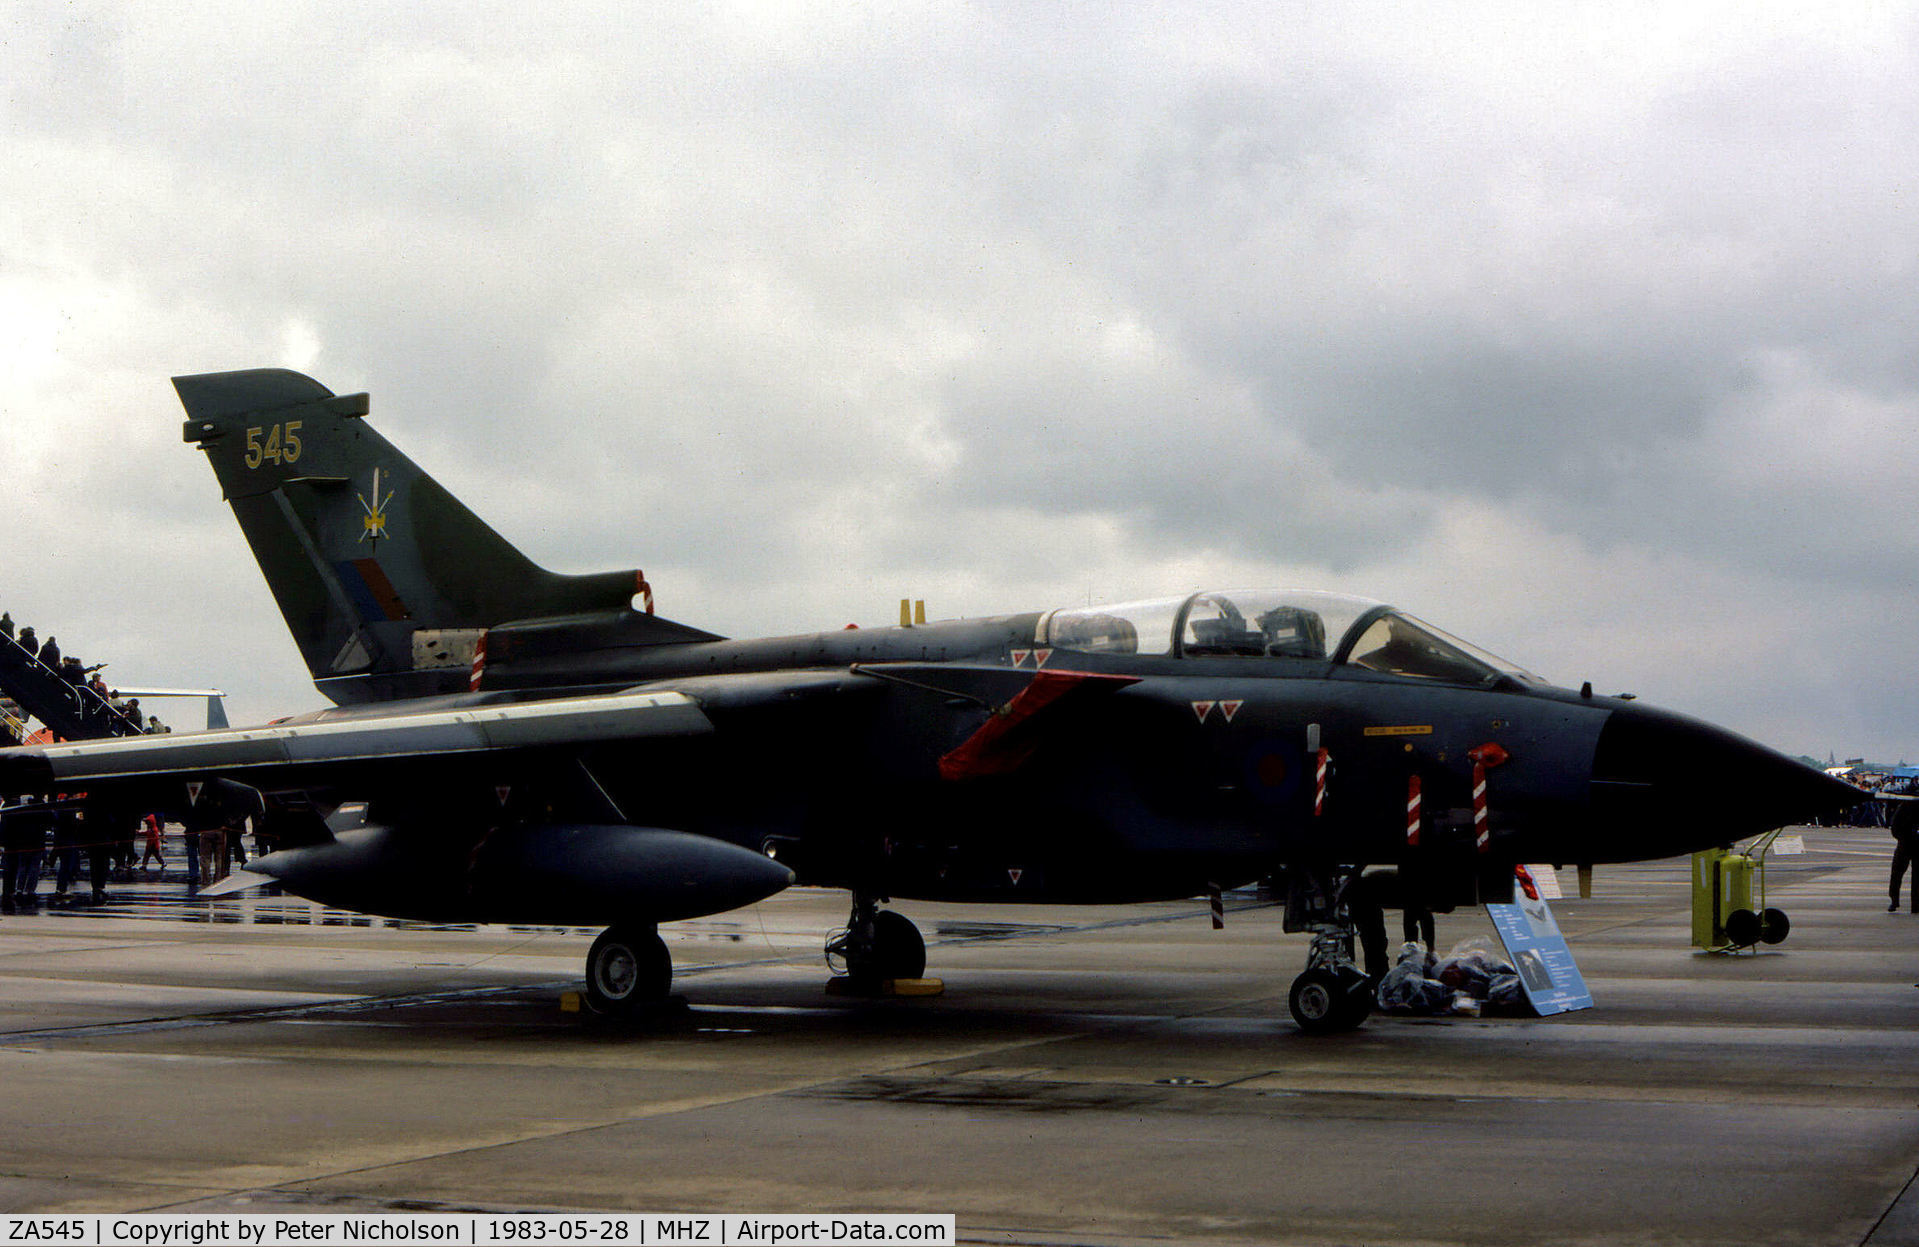 ZA545, 1981 Panavia Tornado GR.1 C/N 057/BS014/3029, Tornado GR.1 of the Tactical Weapons Conversion Unit on display at the 1983 RAF Mildenhall Air Fete.